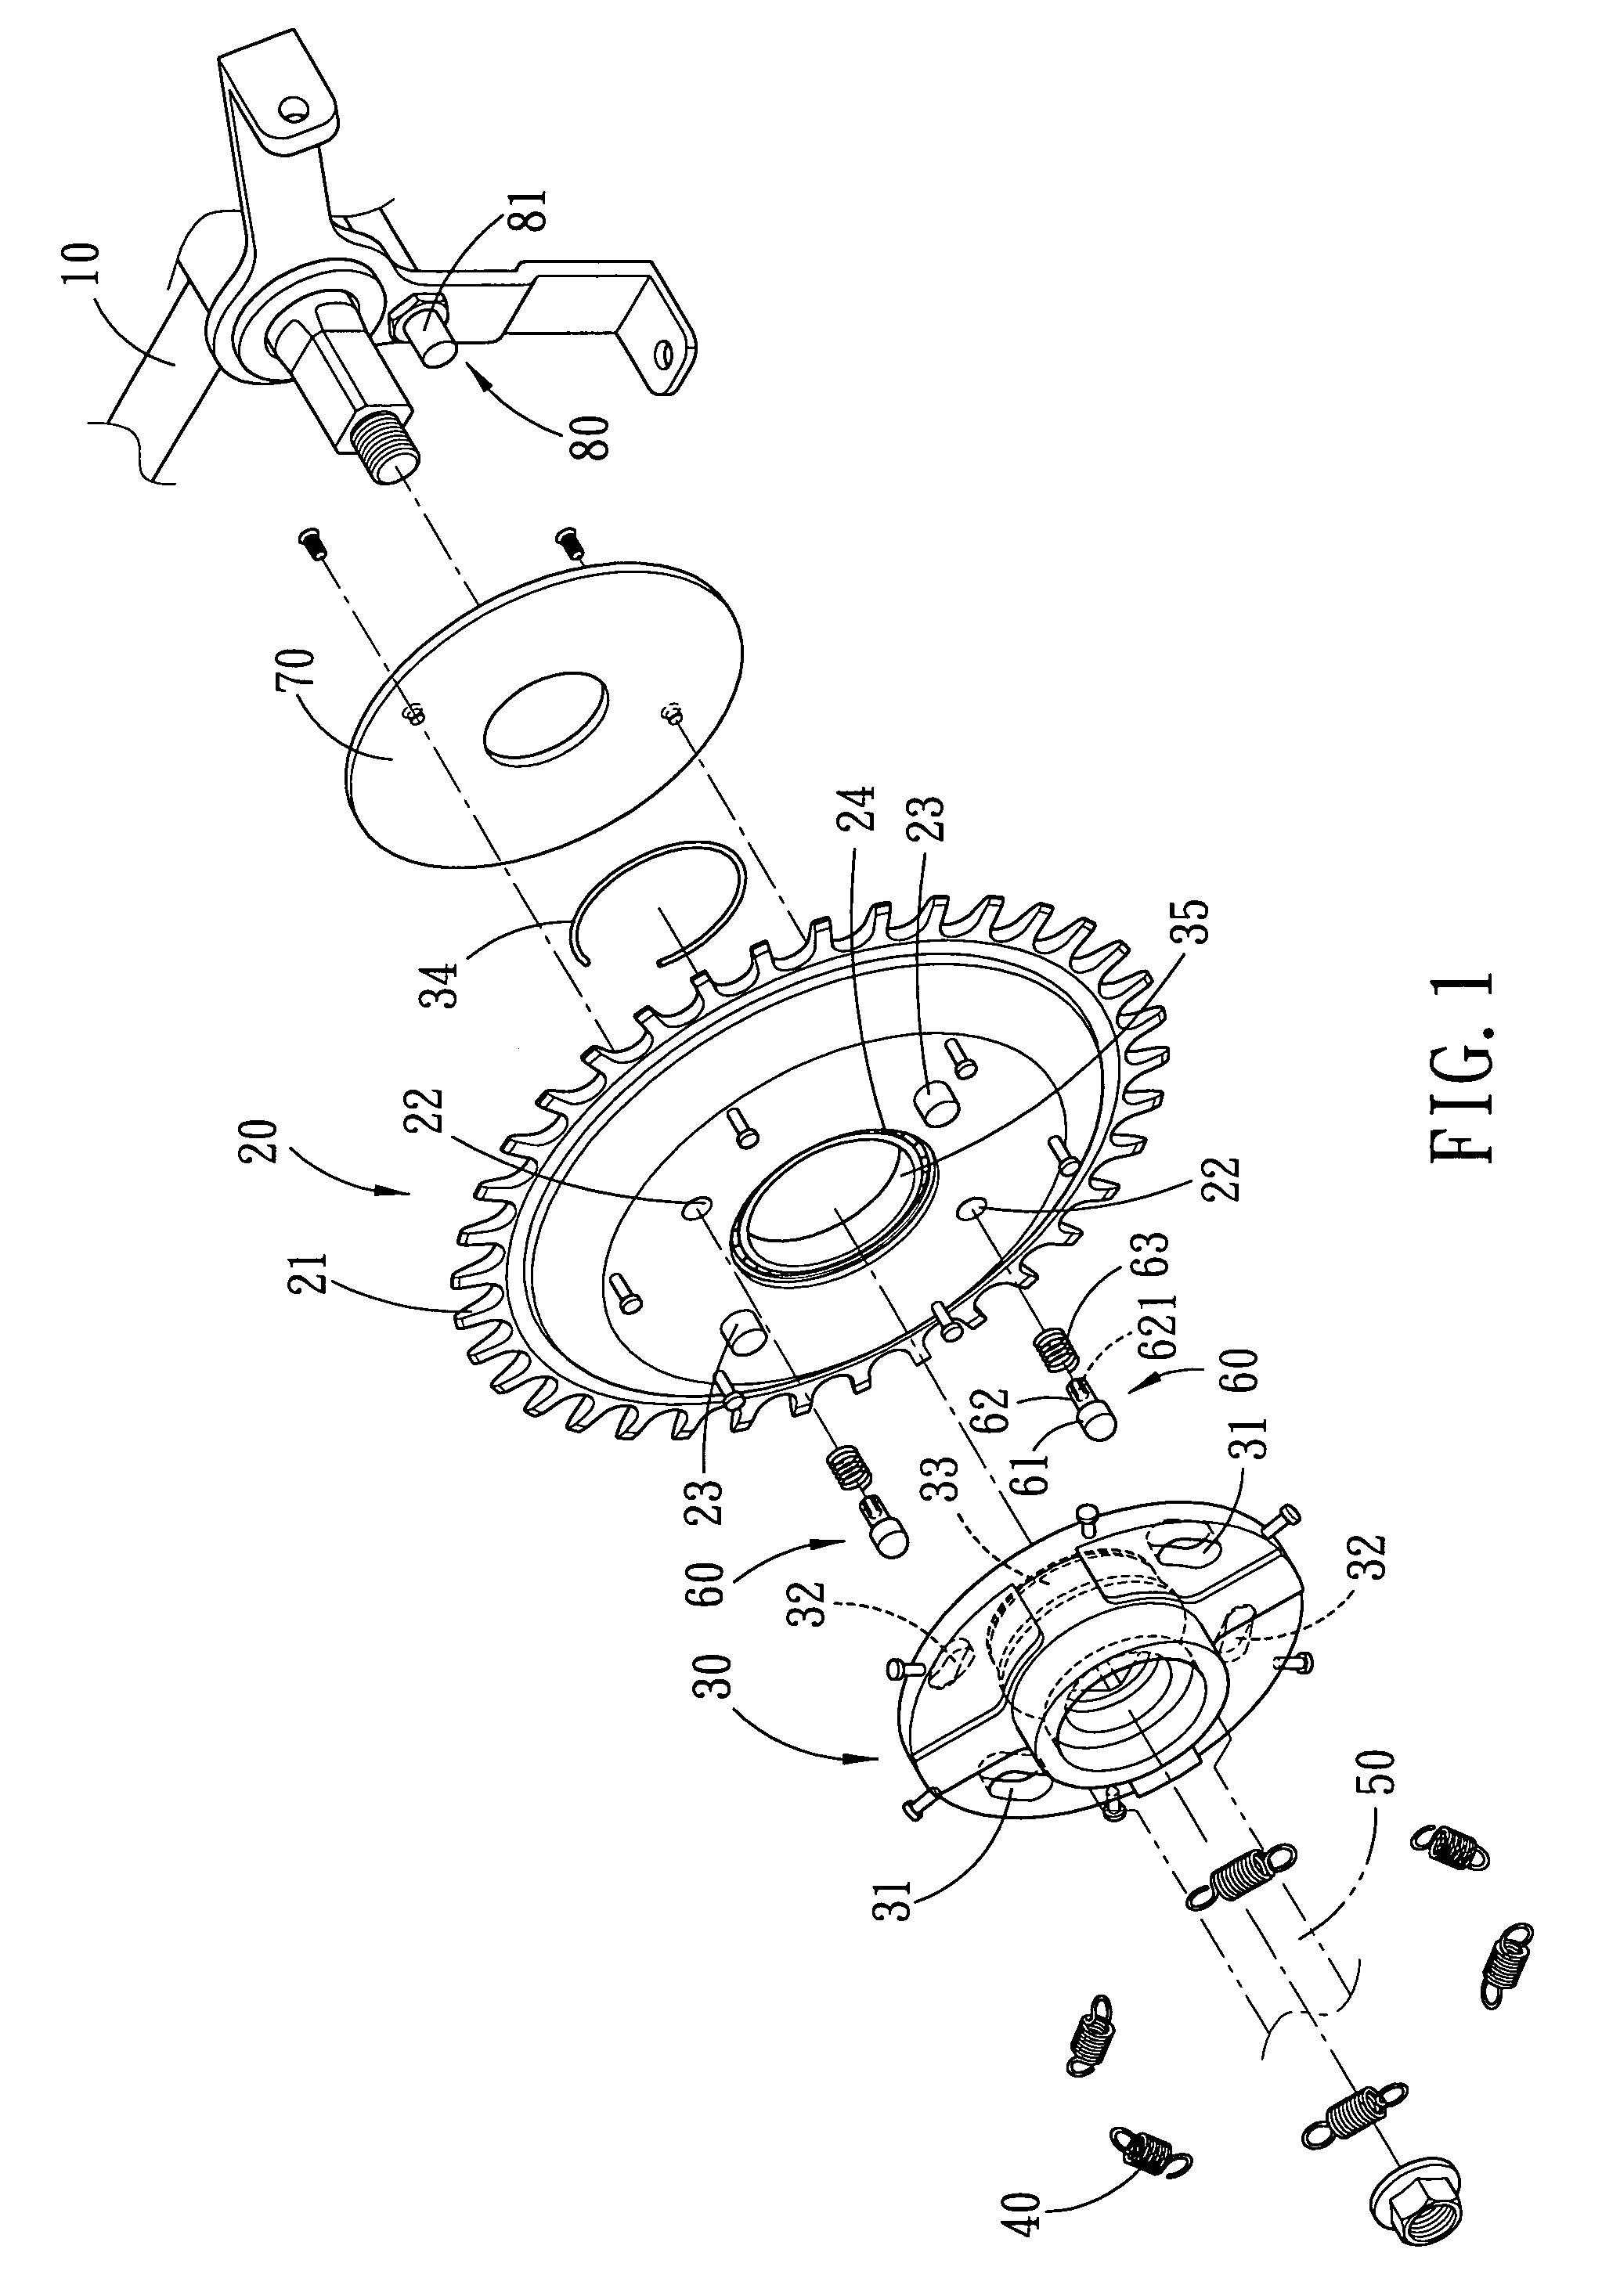 Auxiliary power unit starting apparatus for an electric bicycle